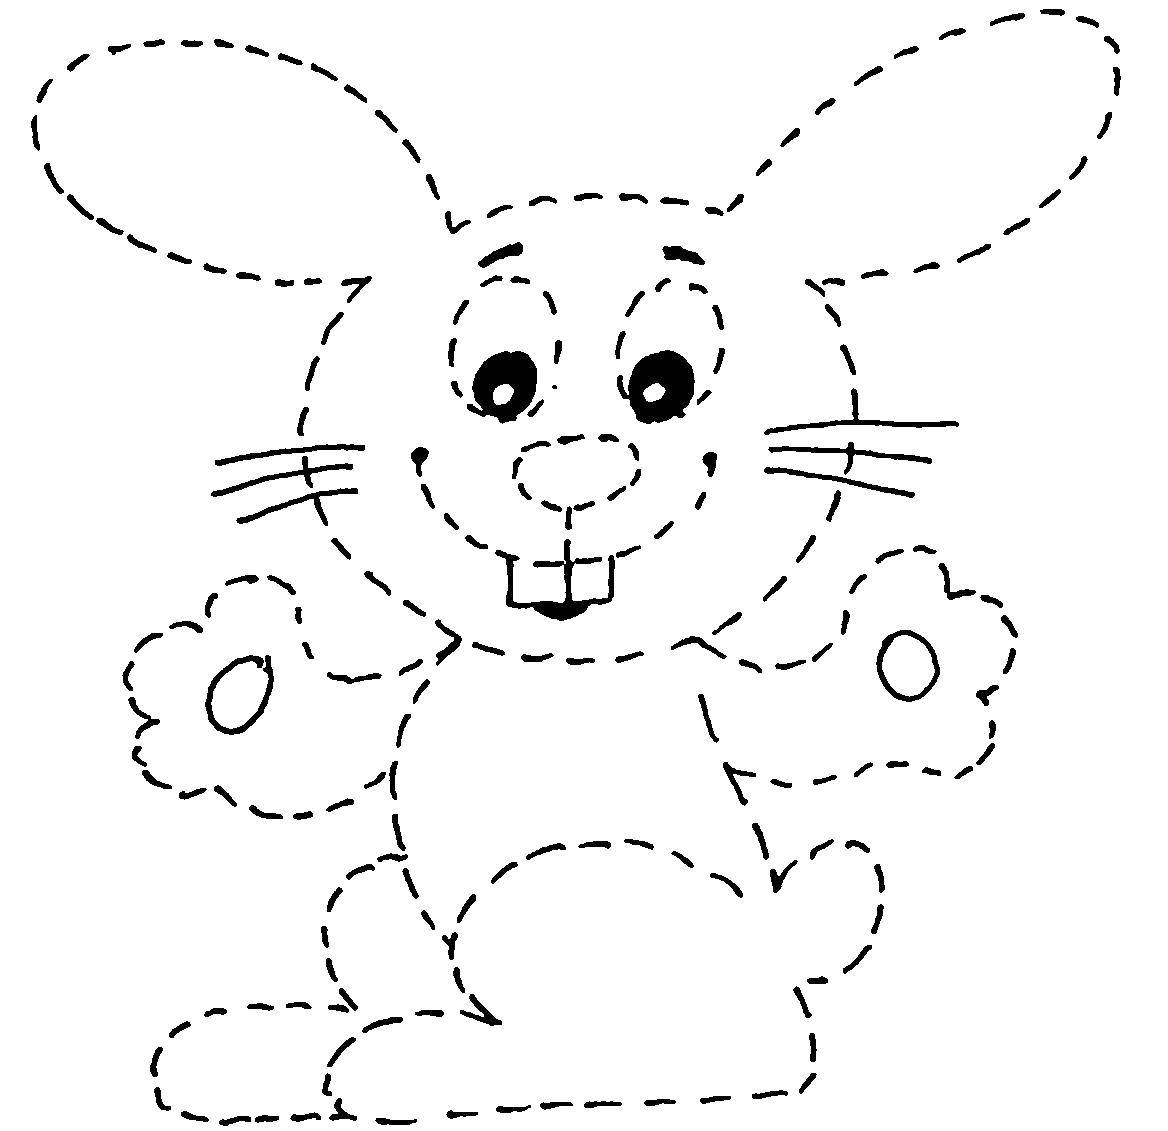 Coloring Bunny. Category fix on the model. Tags:  Bunny, Doris.